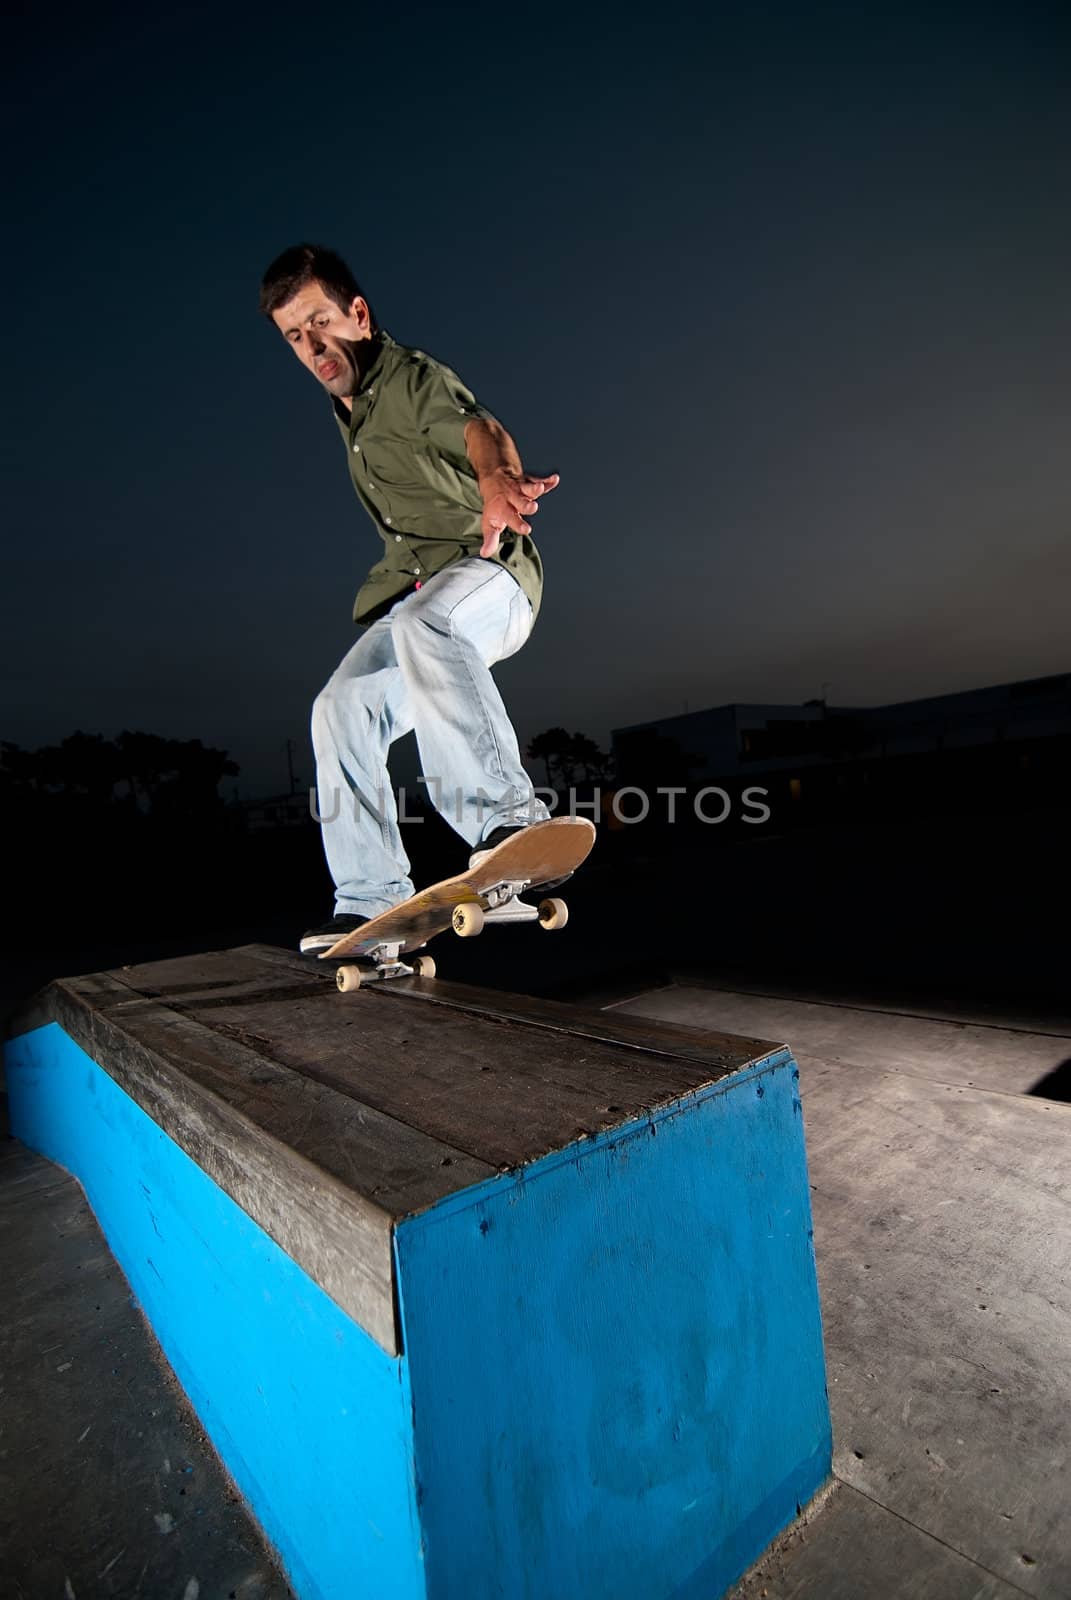 Skateboarder on a grind at night at the local skatepark.